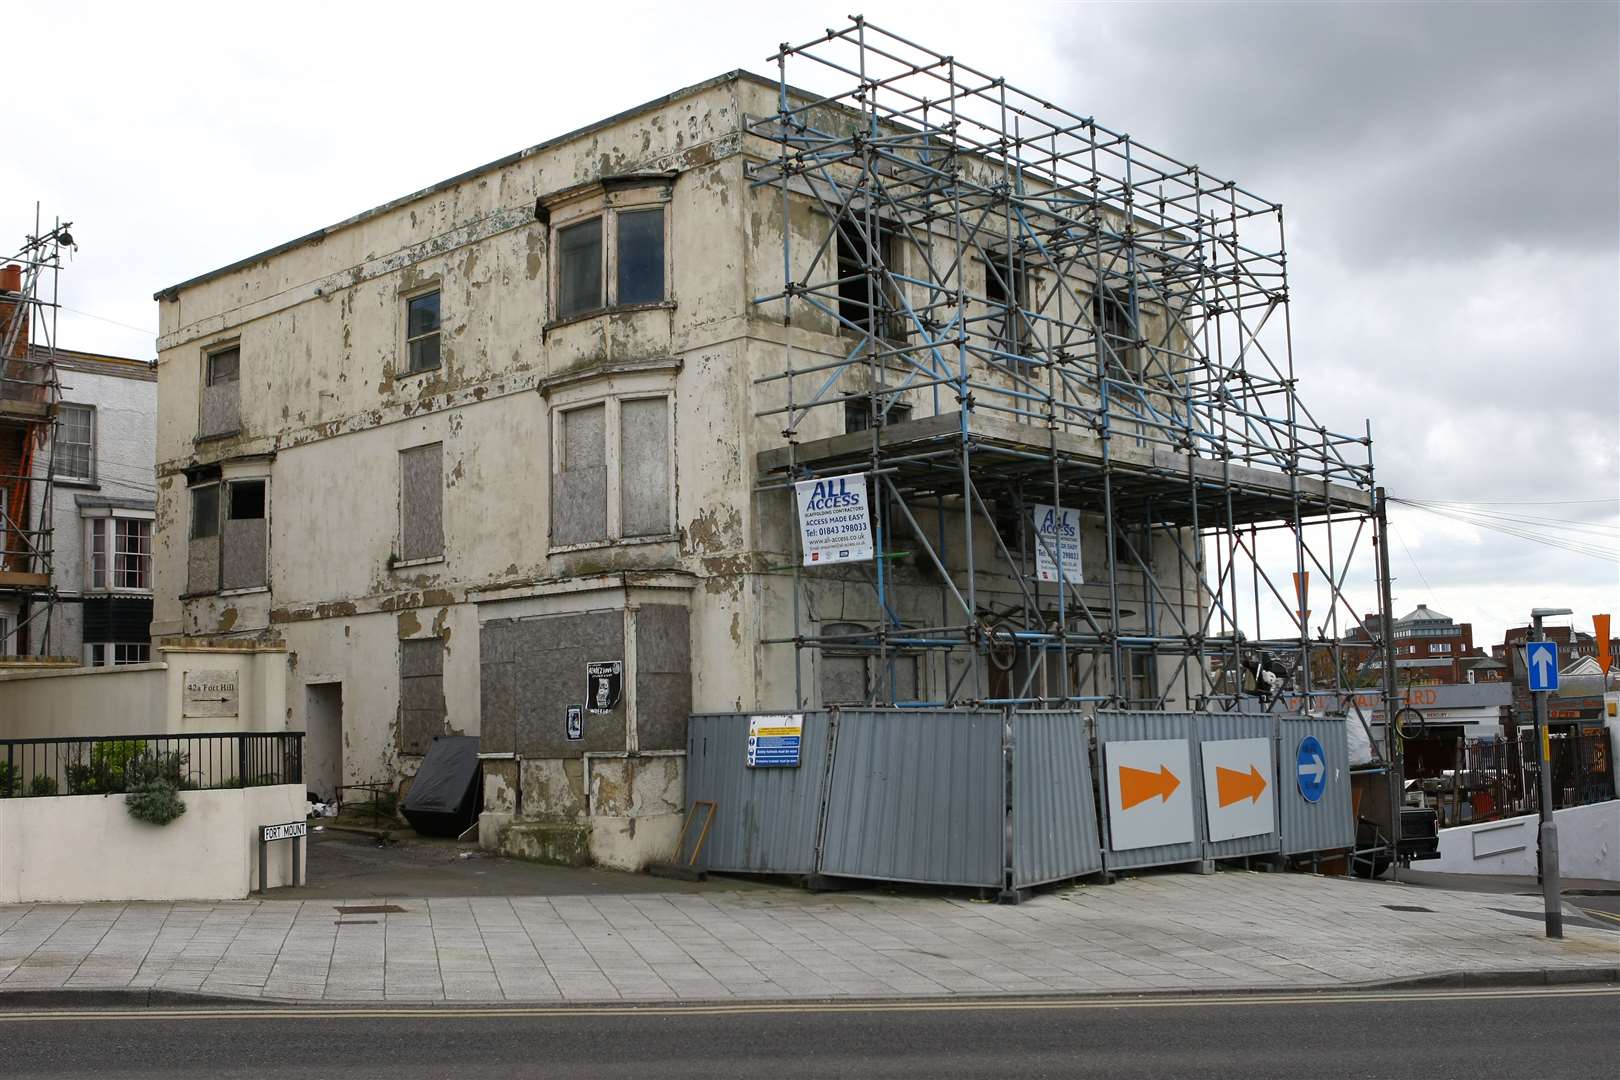 How the site looked in its run-down state in 2016